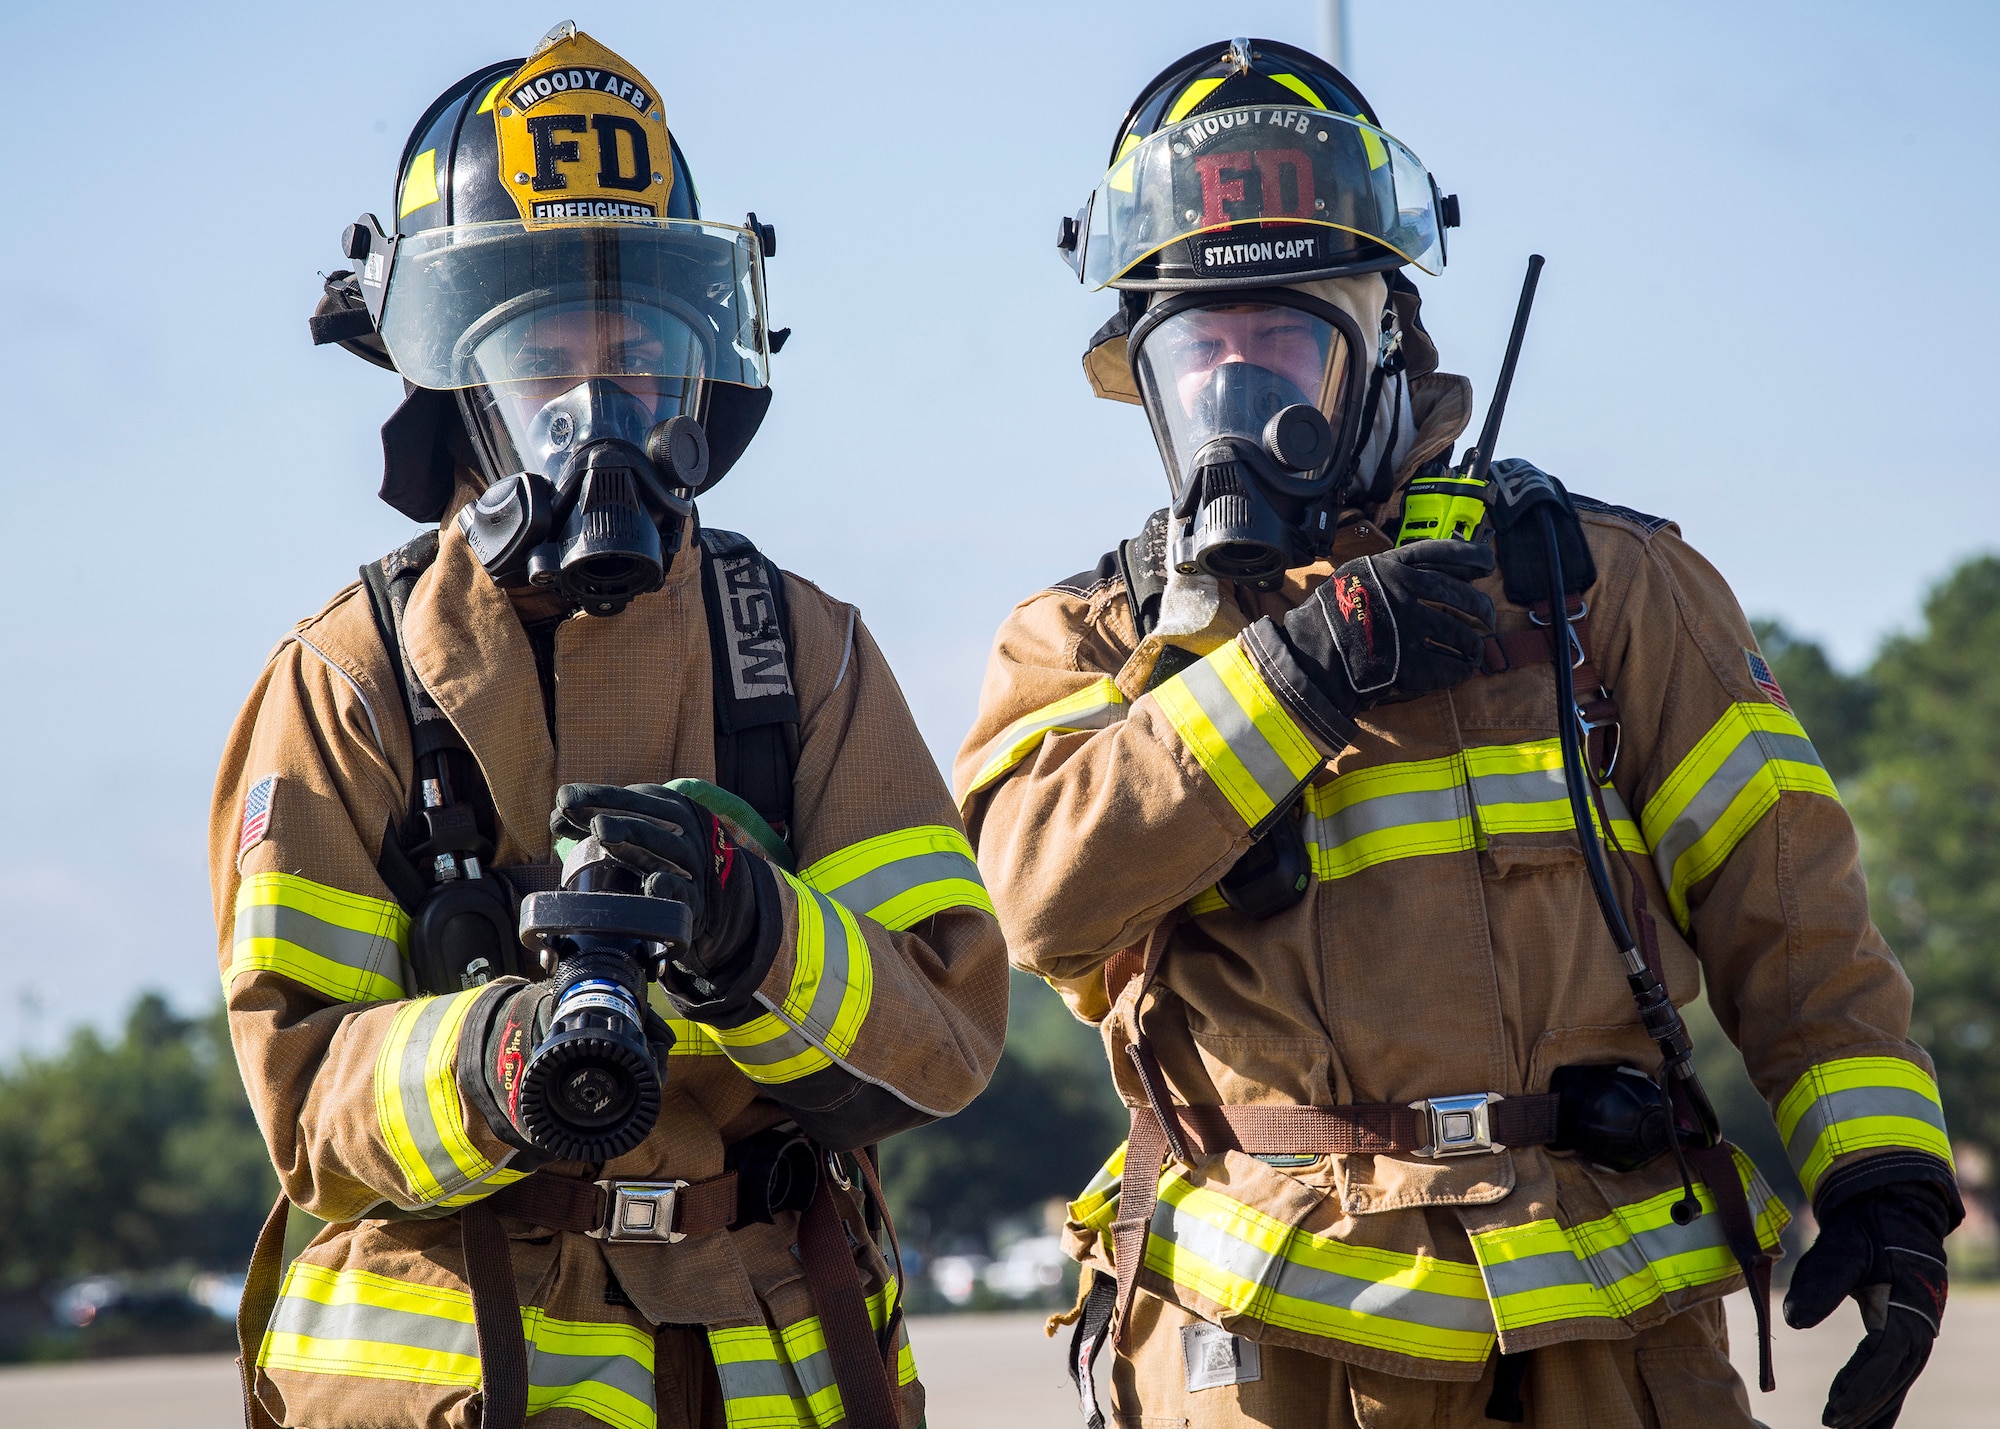 Tech. Sgt. Garey Schmidt, right, 23d Civil Engineer Squadron (CES) firefighter station chief, gives instruction during HC-130J Combat King II egress training, July 11, 2019, at Moody Air force Base, Ga. Firefighters conducted the training to evaluate their overall knowledge and proficiency of how to properly shut down and rescue personnel from a C-130 during an emergency situation. The training required the firefighters to properly enter and ventilate the aircraft while conducting swift rescue techniques to safely locate and remove passengers from the aircraft. (U.S. Air Force photo by Airman 1st Class Eugene Oliver)